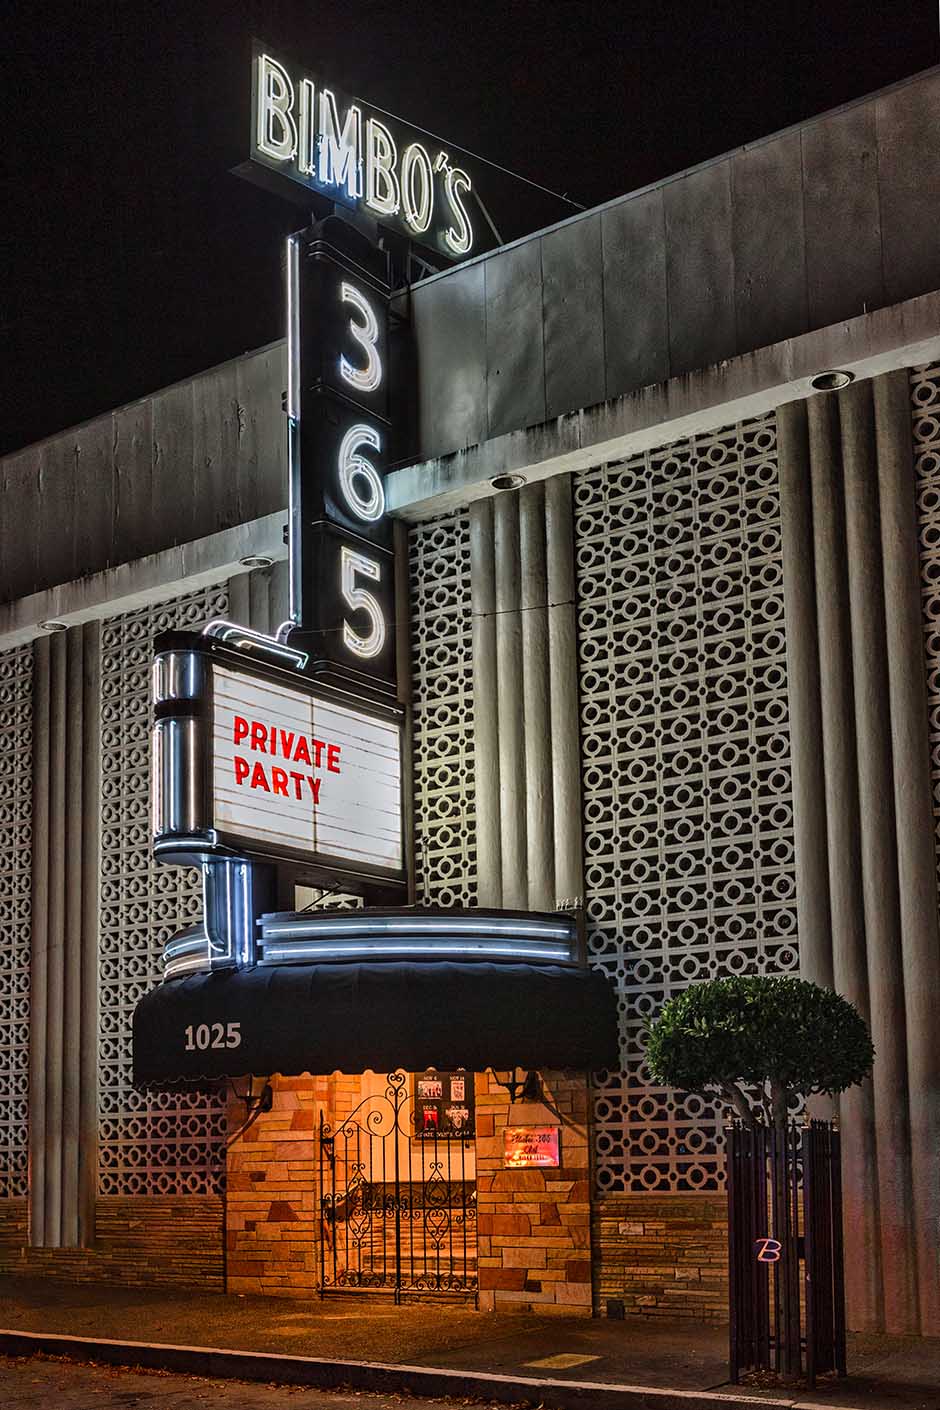 Bimbo’s 365 Club is located at 1025 Columbus Avenue, San Francisco. Bimbo’s opened in 1951. Over the years a long list of entertainers have preformed here; Joey Bishop, Smokey Robinson, Neil Diamond, Jewel and many more.